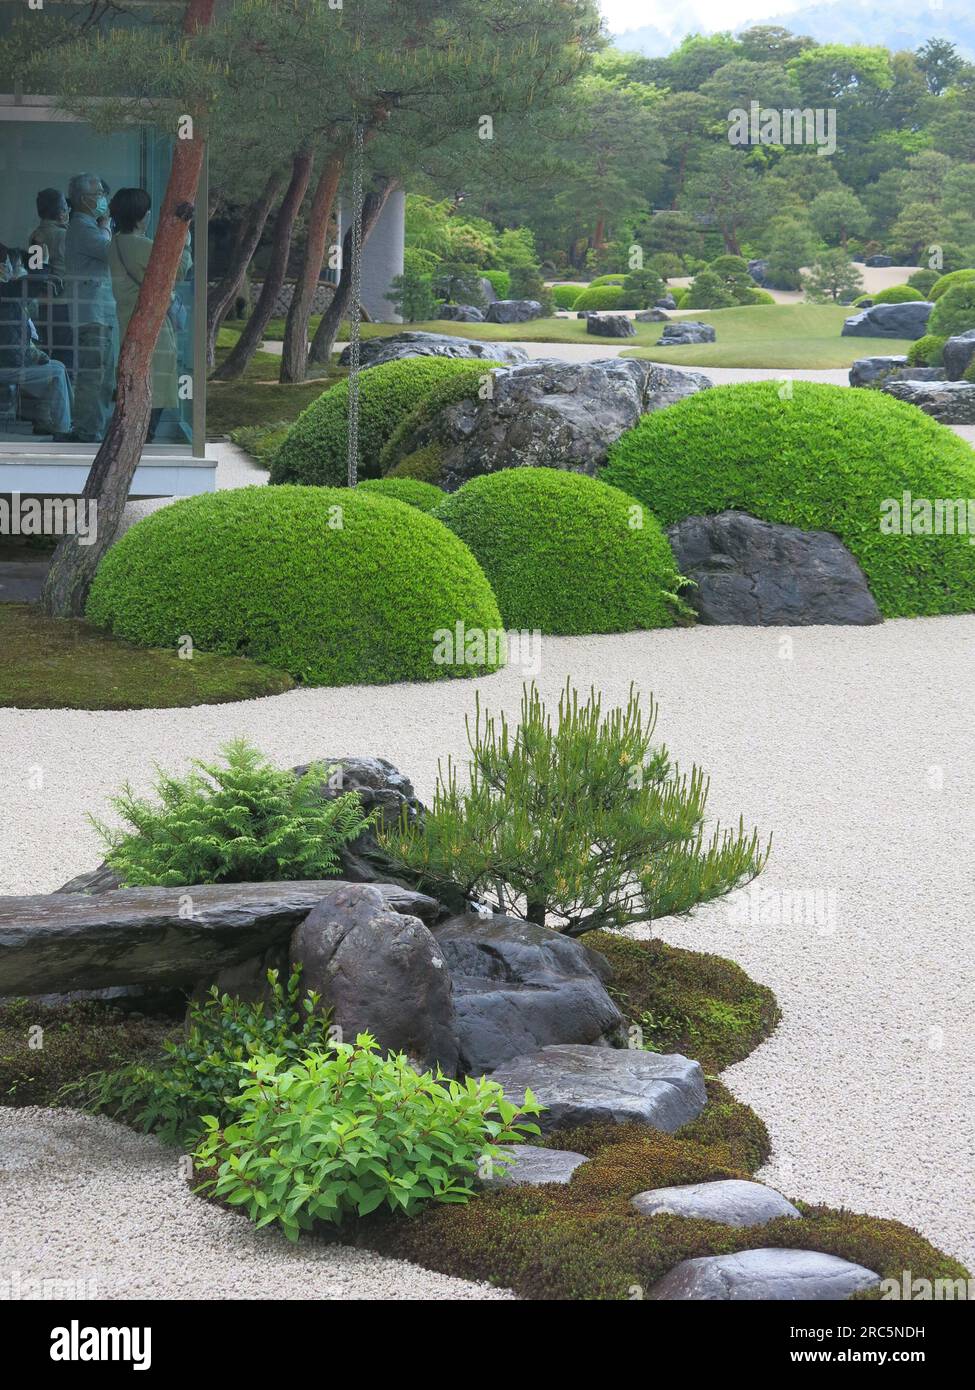 Elements of Japanese garden design: rocks, moss, gravel, pines and cloud-pruning are all present in the gardens at the Adachi Museum of Art. Stock Photo